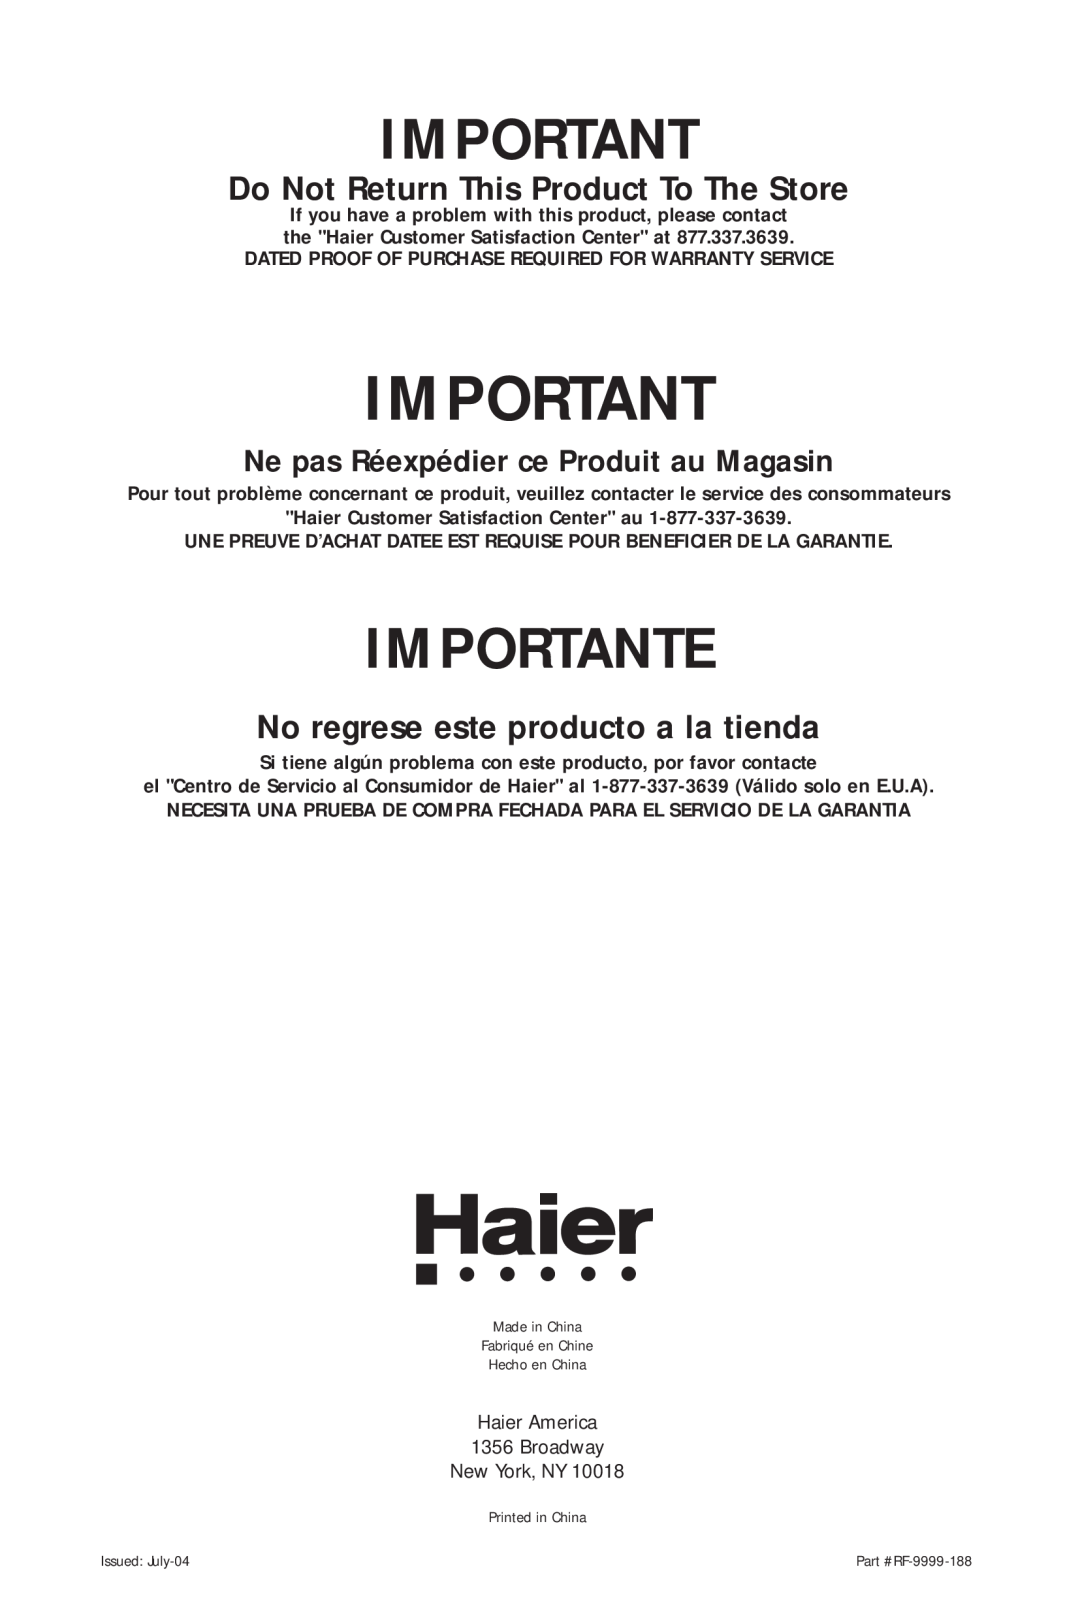 Haier HVH014A manual Importante, Do Not Return This Product To The Store, No regrese este producto a la tienda 